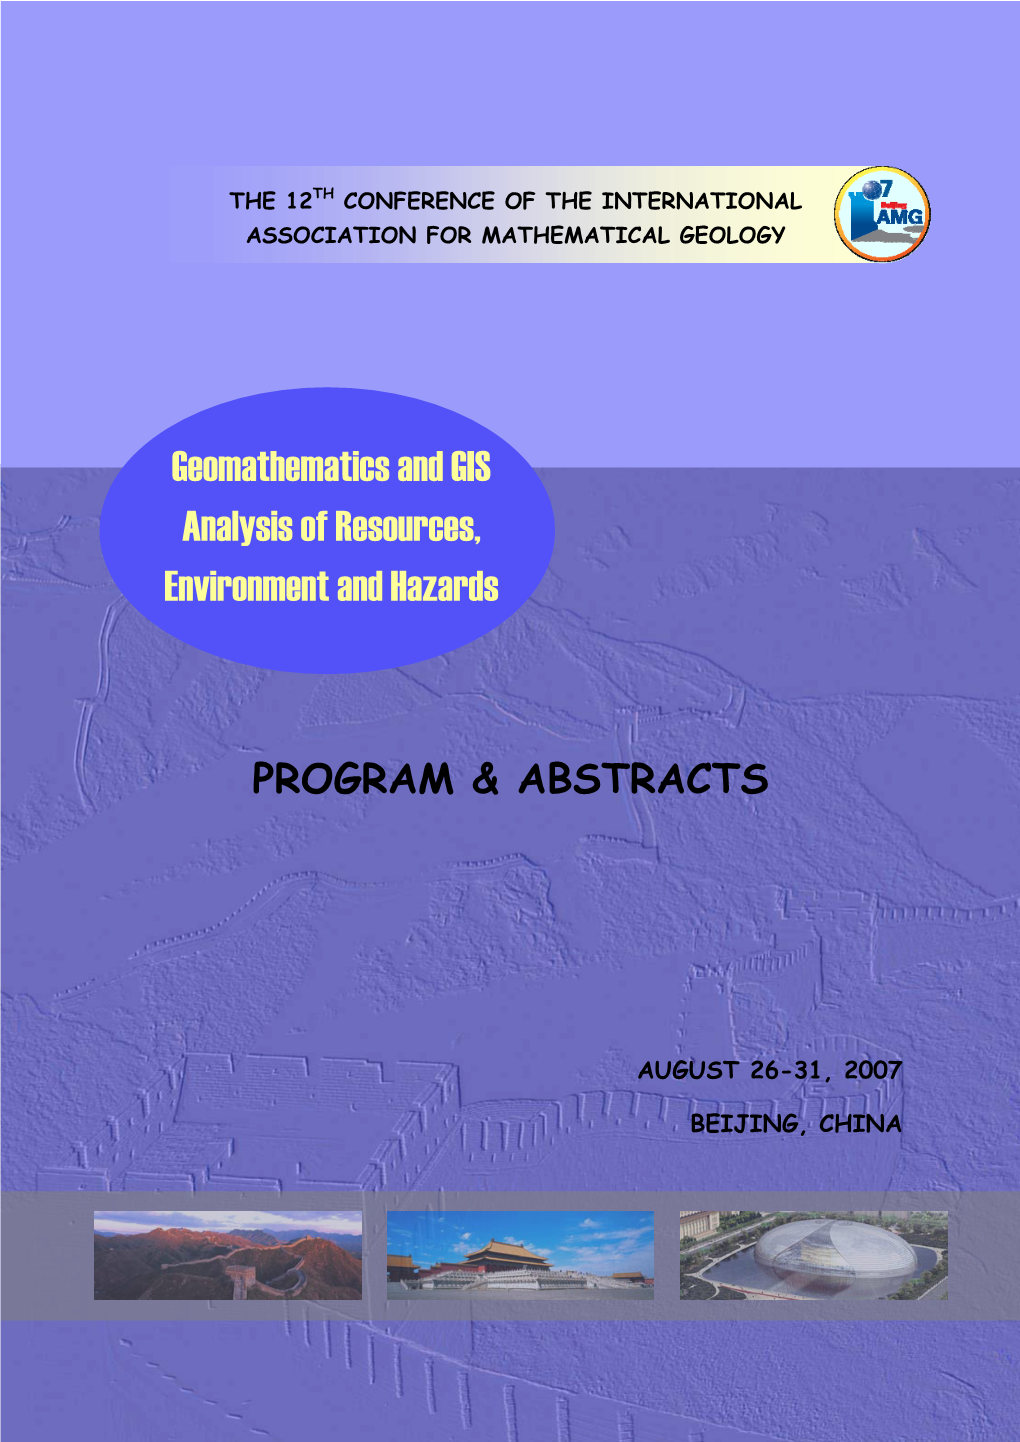 Geomathematics and GIS Analysis of Resources, Environment and Hazards”